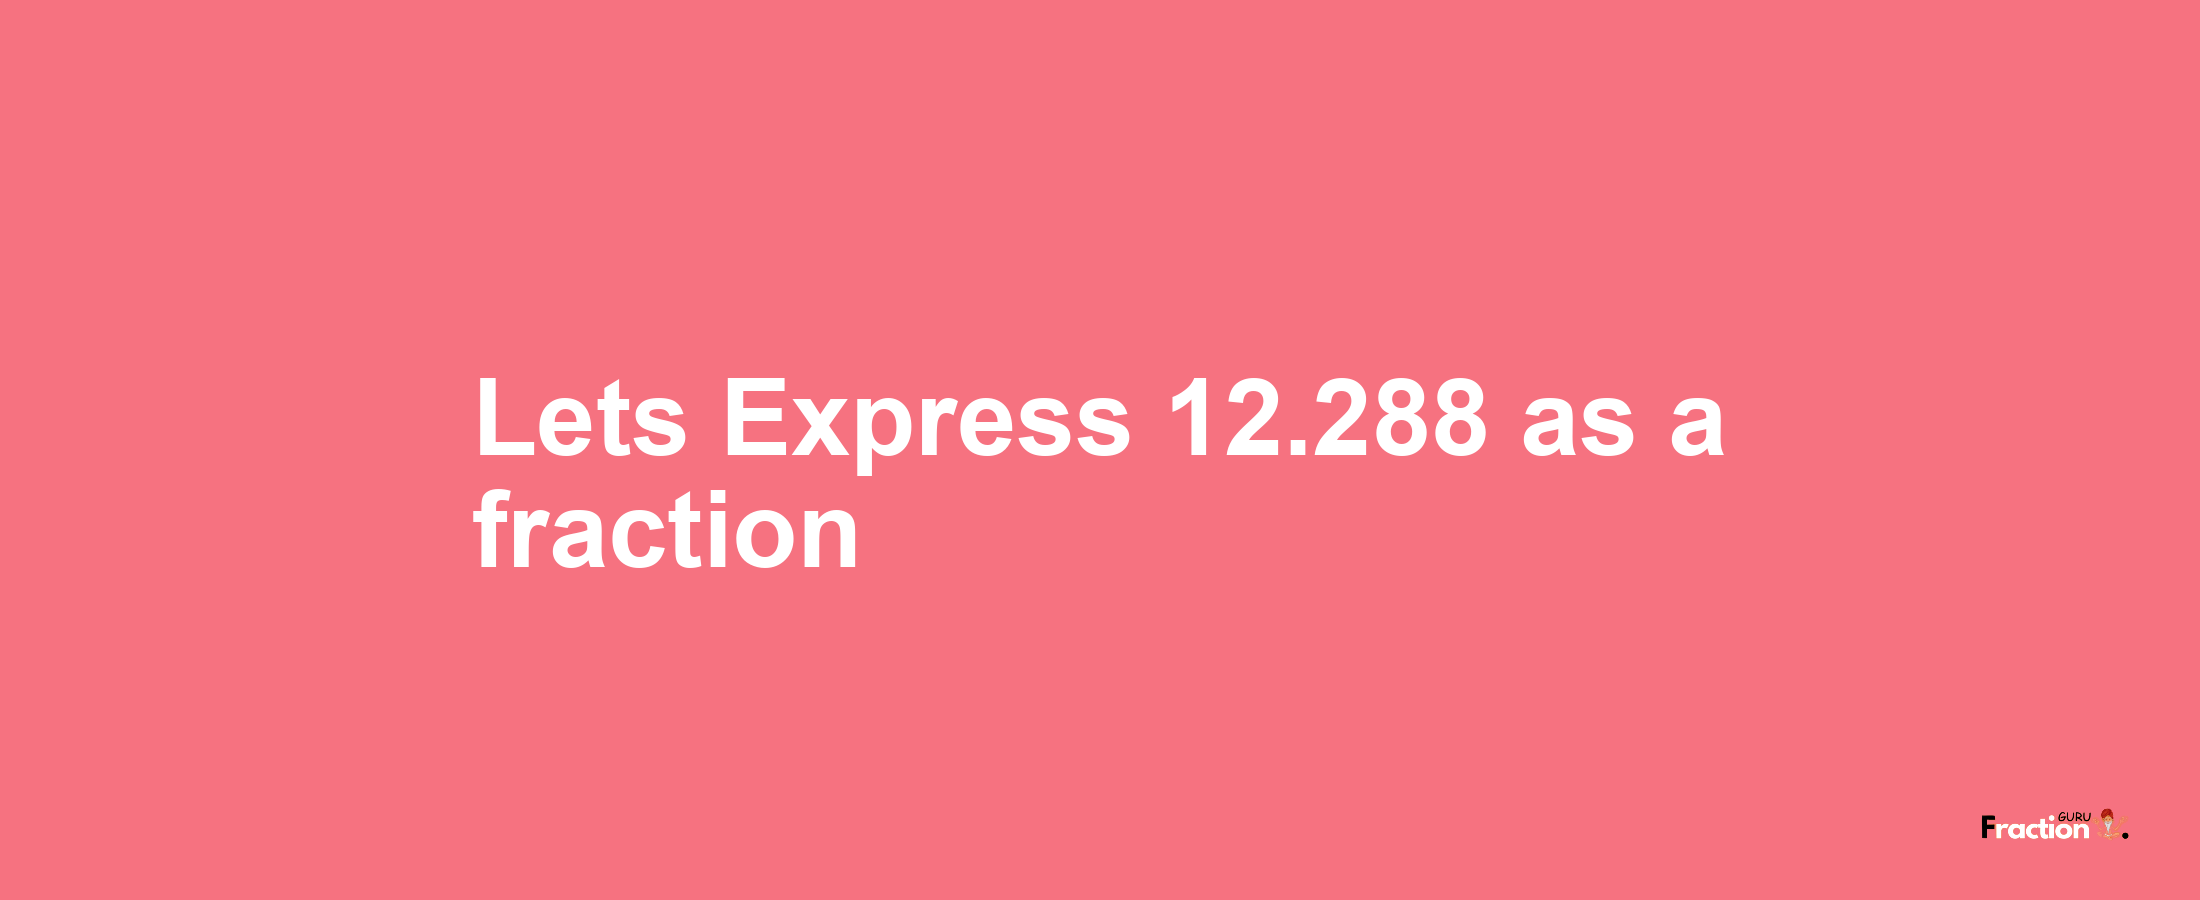 Lets Express 12.288 as afraction